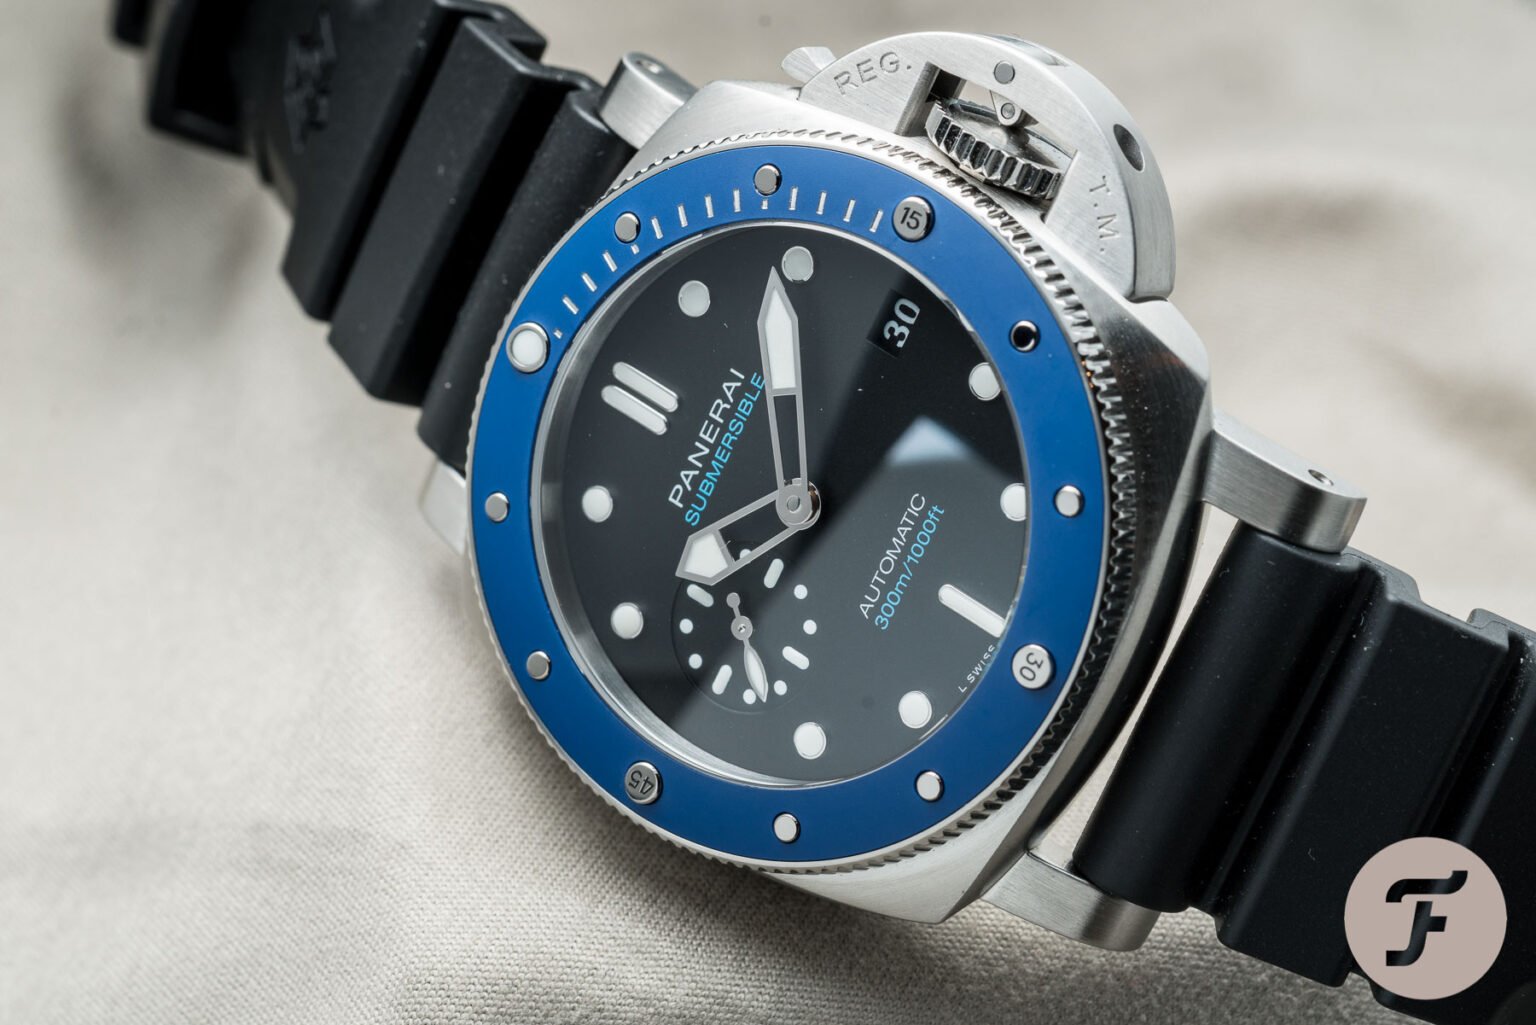 Hands On The Panerai Submersible Pam01209 Azzurro Dive Watch